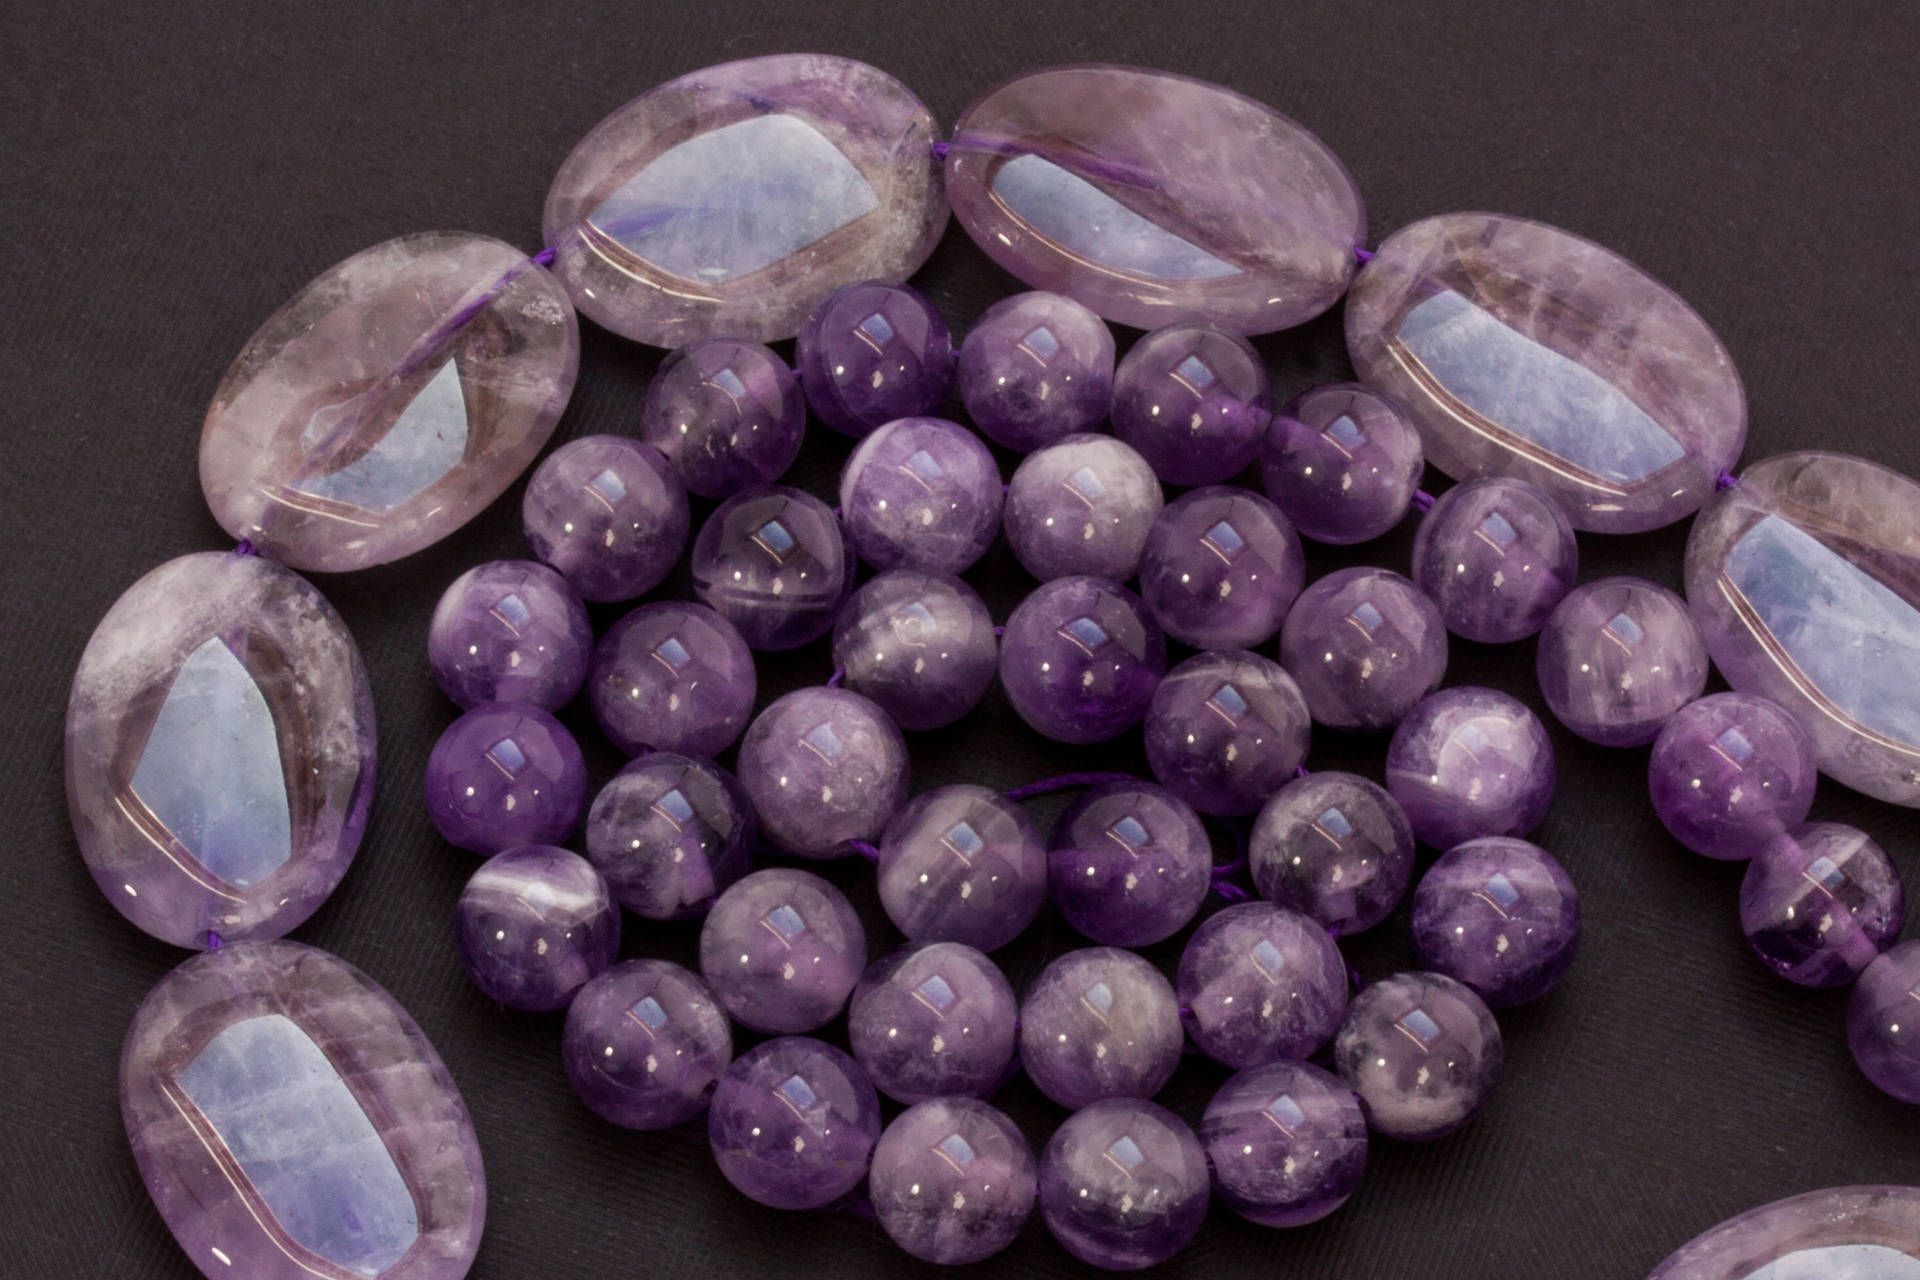 Polished Amethyst Beads Wallpaper